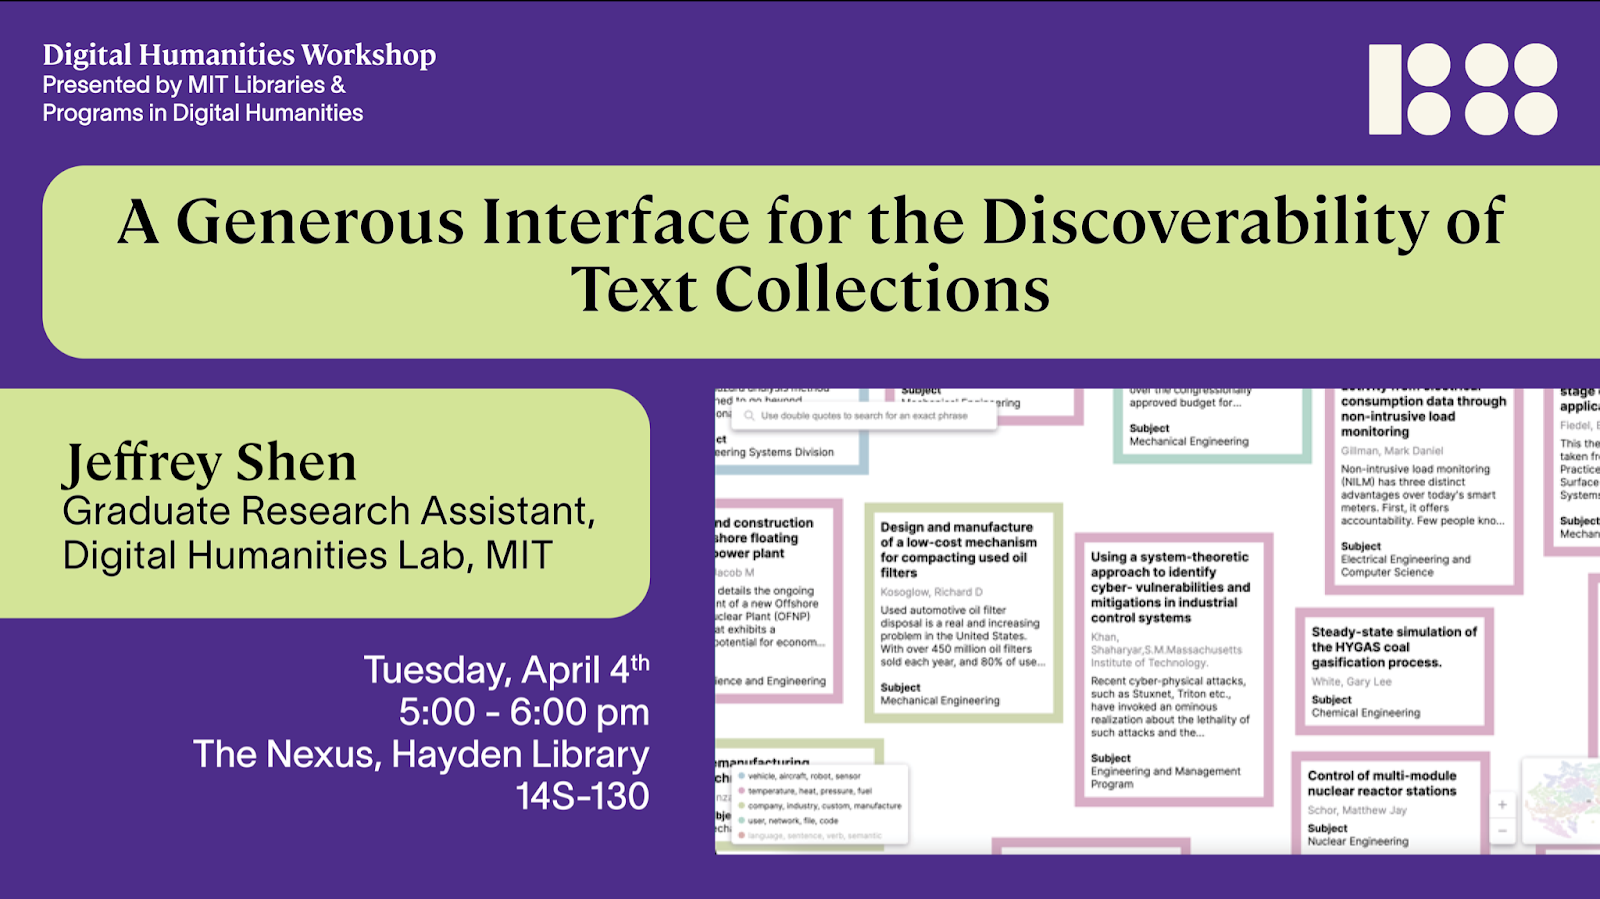 Poster for Digital Humanities Workshop presented by MIT Libraries & Programs in Digital Humanities. "A Generous Interface for the Discoverability of Text Collections,” by Jeffrey Shen (Graduate Research Assistant, Digital Humanities Lab, MIT). Tuesday, April 4, 5-6pm in The Nexus, Hayden Library (14S-130). Features image of color-coded text boxes and key, with study titles, authors, and abstract inside each box.